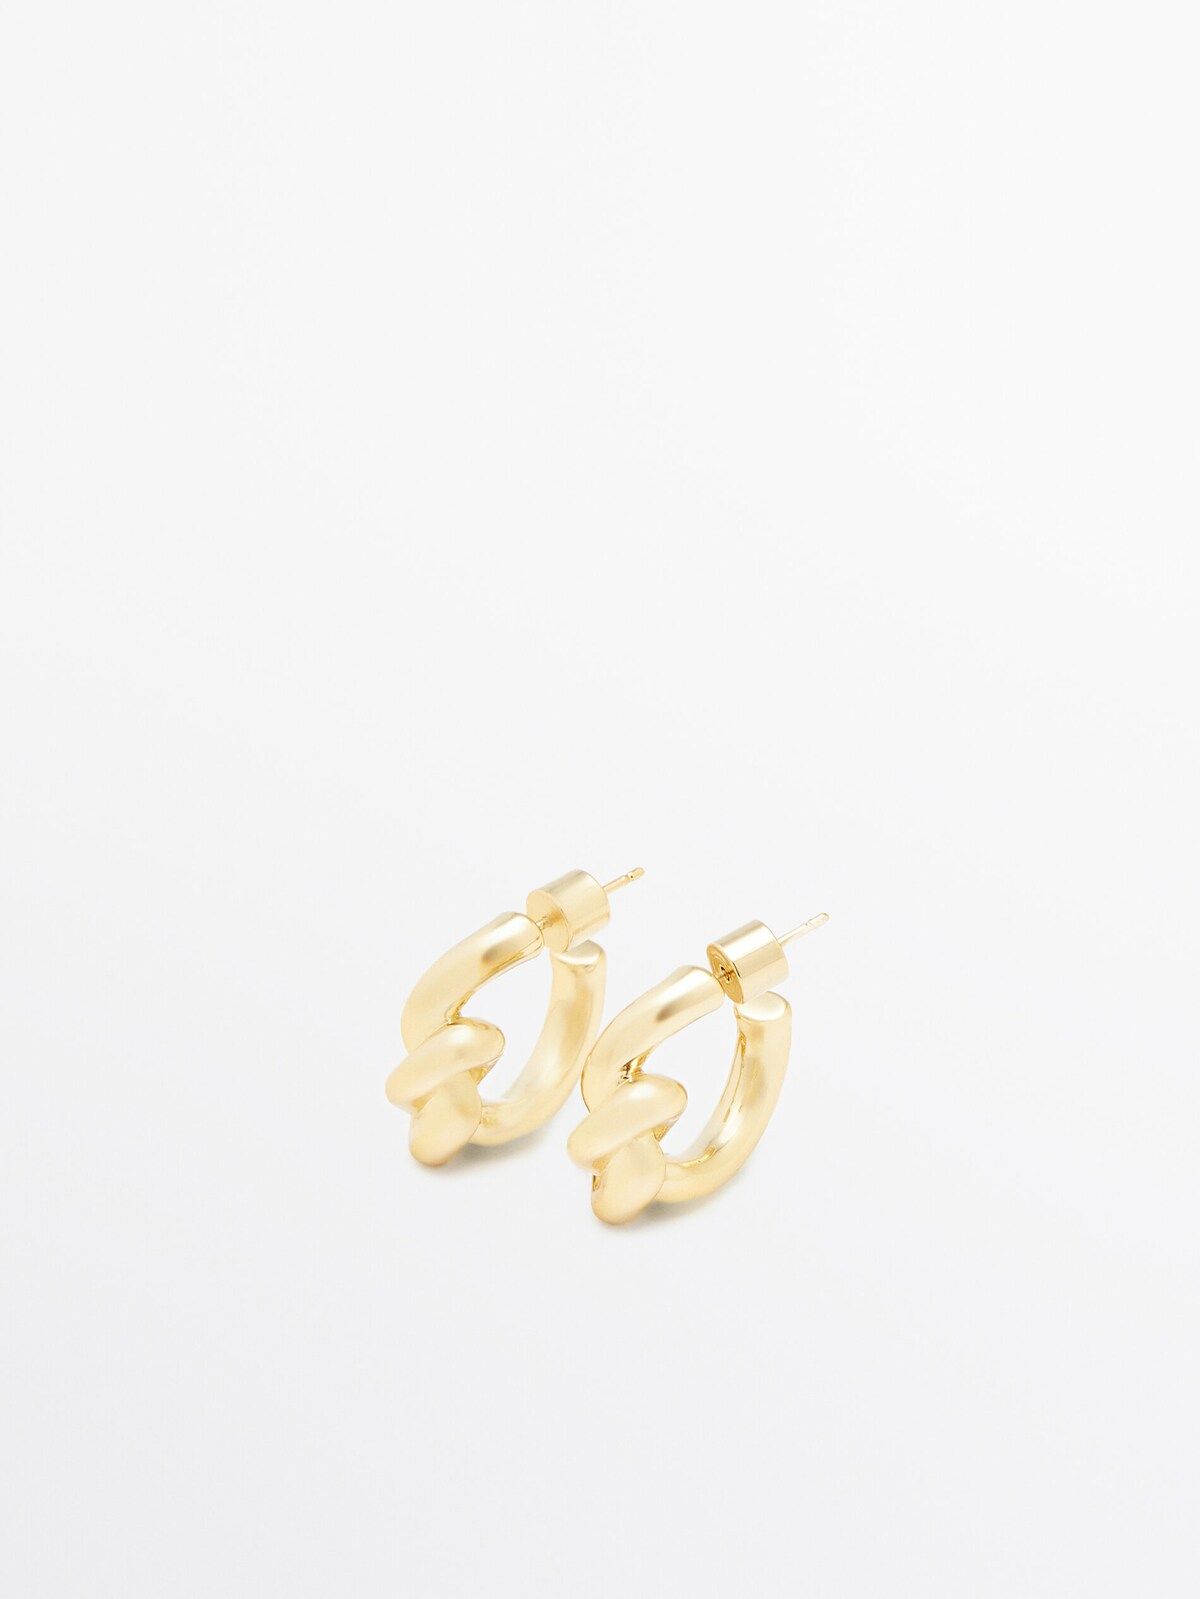 Earrings with knot detail | Massimo Dutti (US)